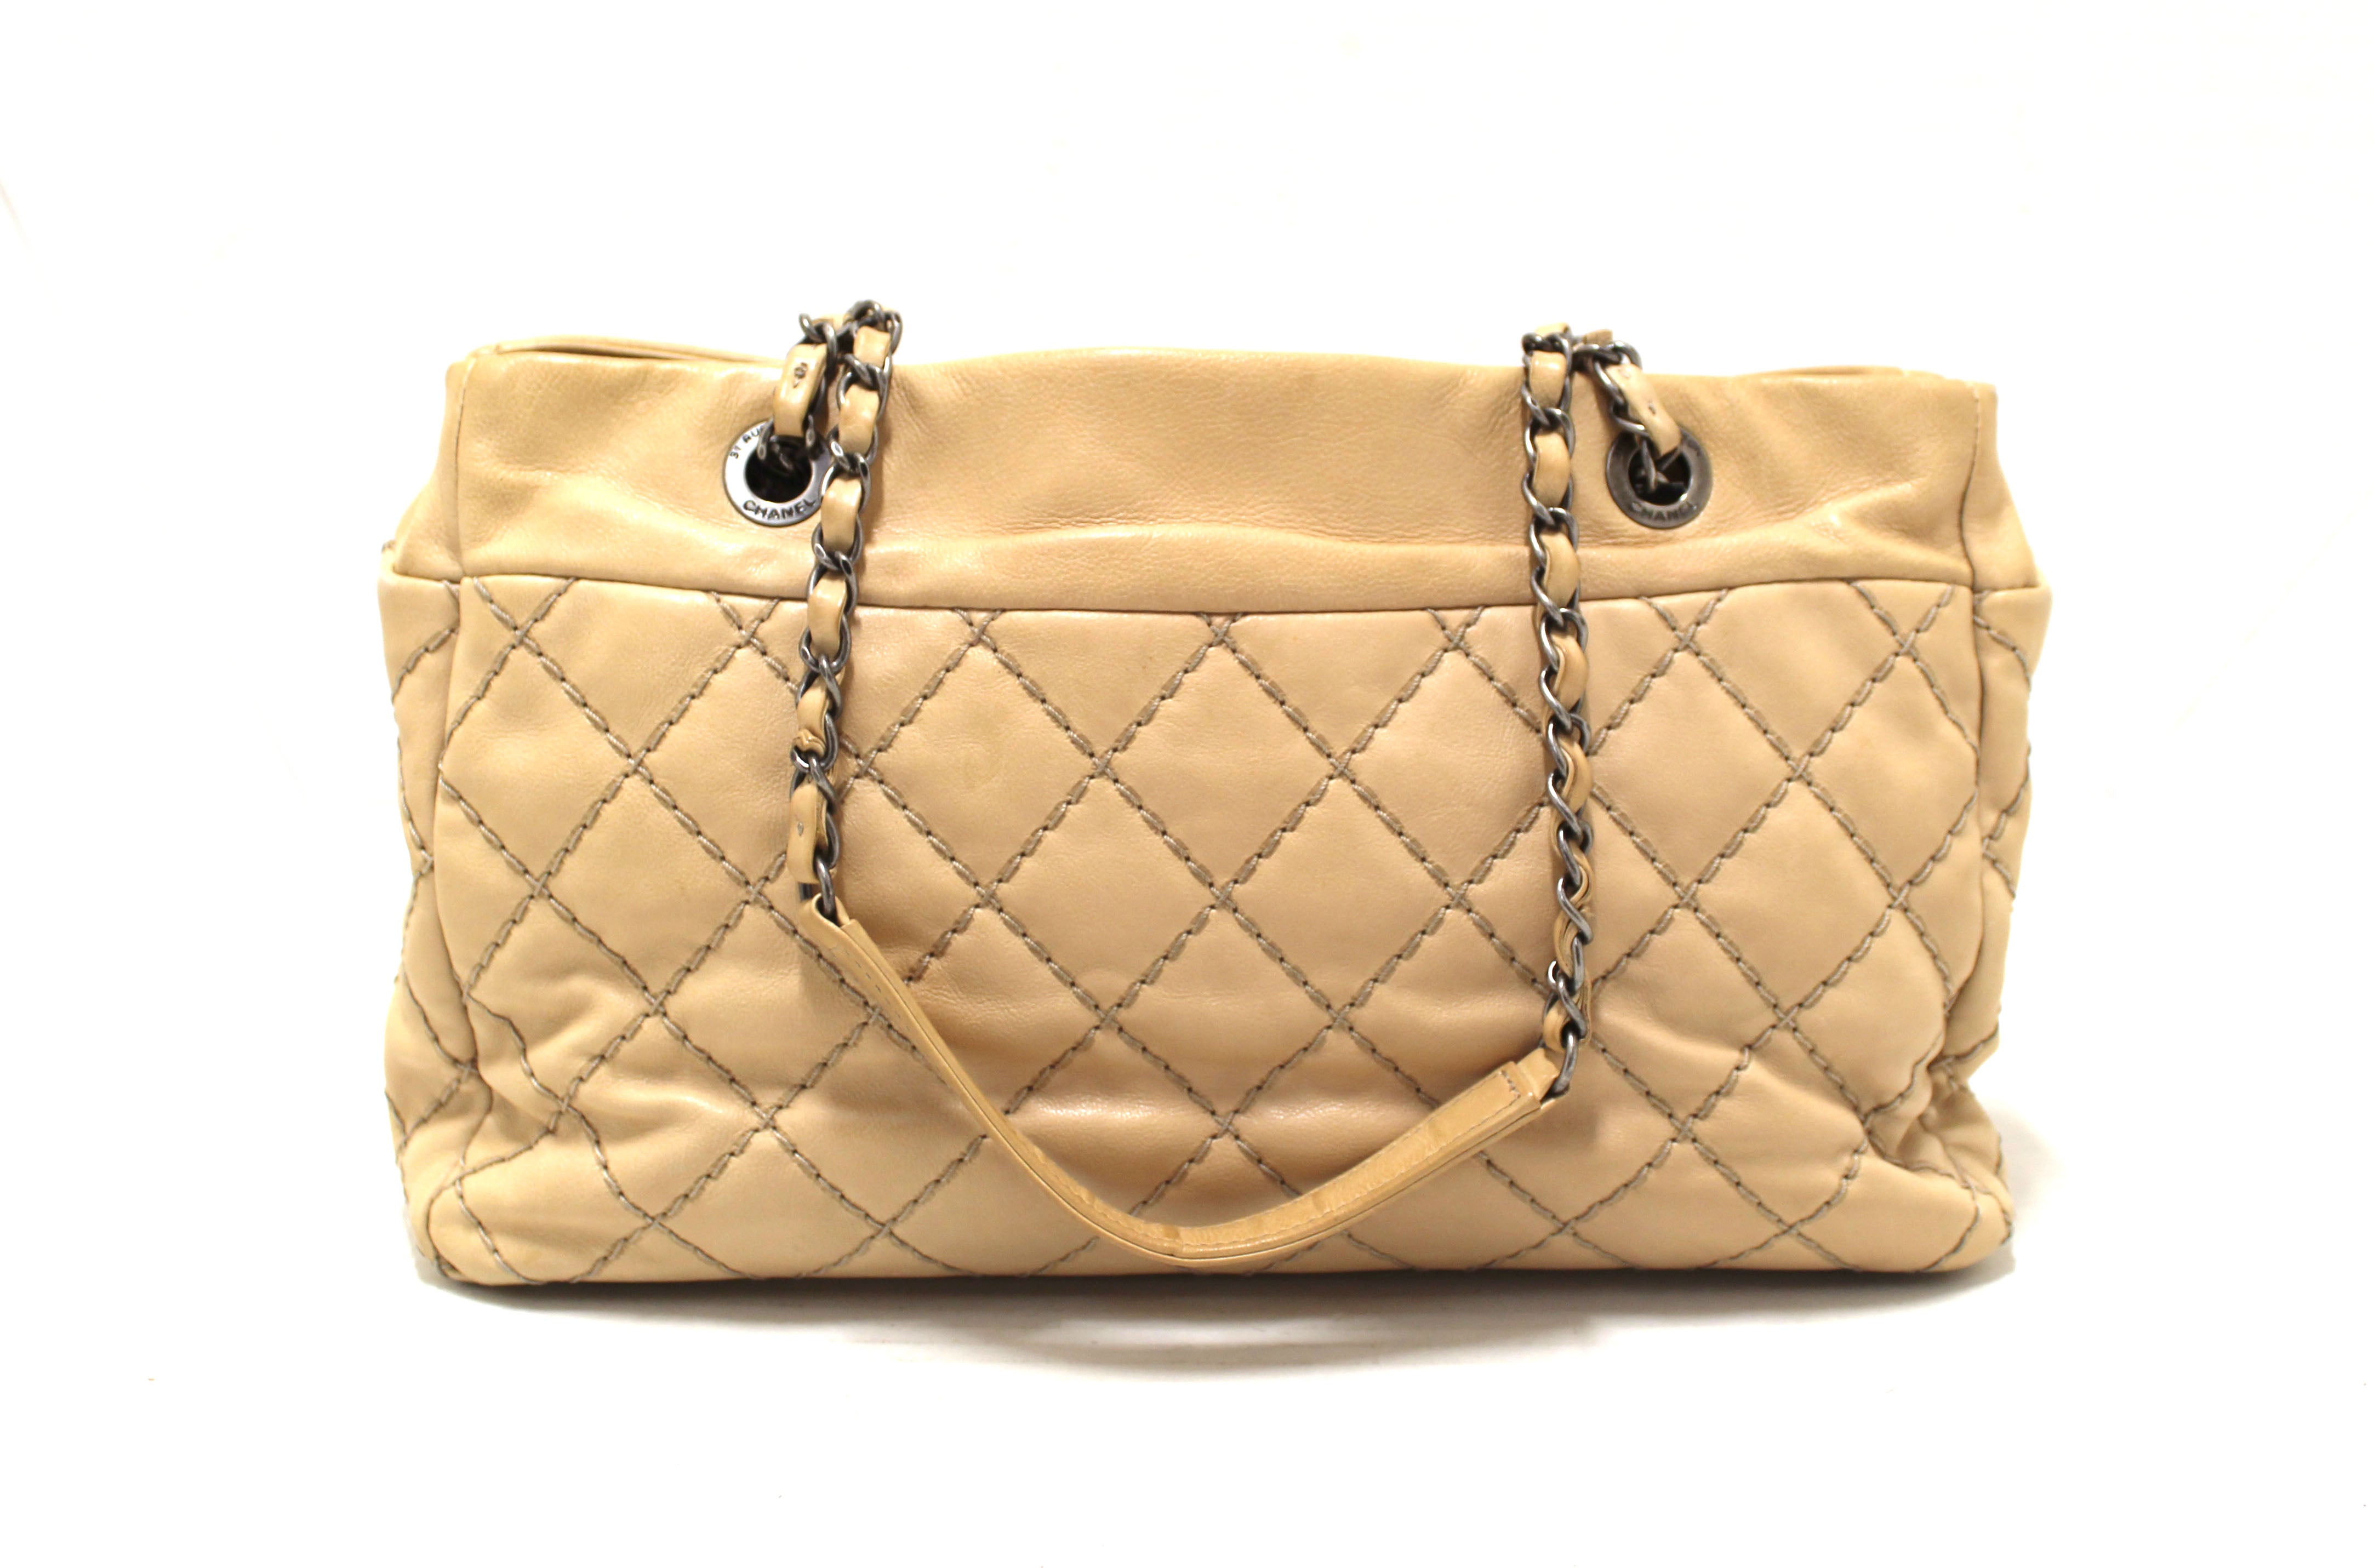 Authentic Chanel 31 Rue Cambon Paris Beige Stitched Quilted Lambskin  Leather Tote Shoulder Bag